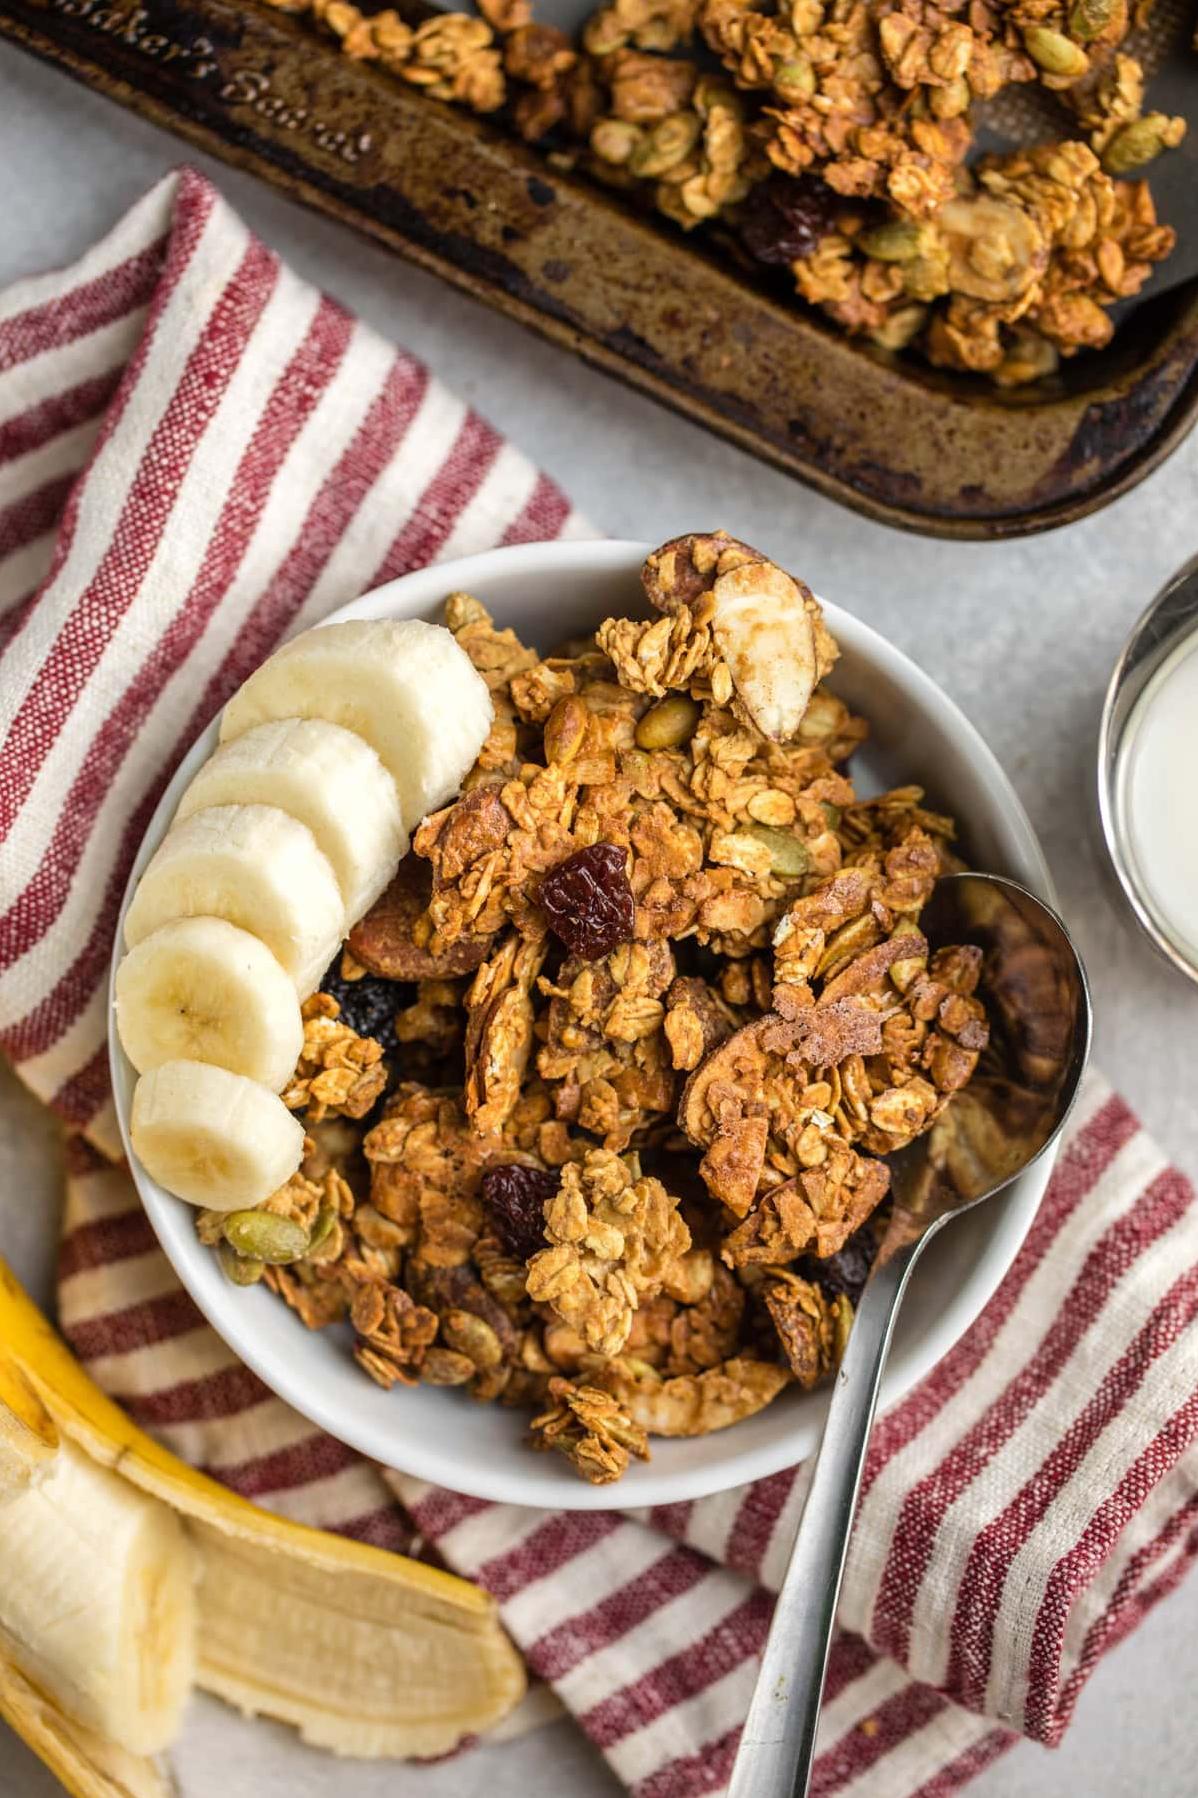  One bowl of this dairy-free granola and you'll feel energized for the day.